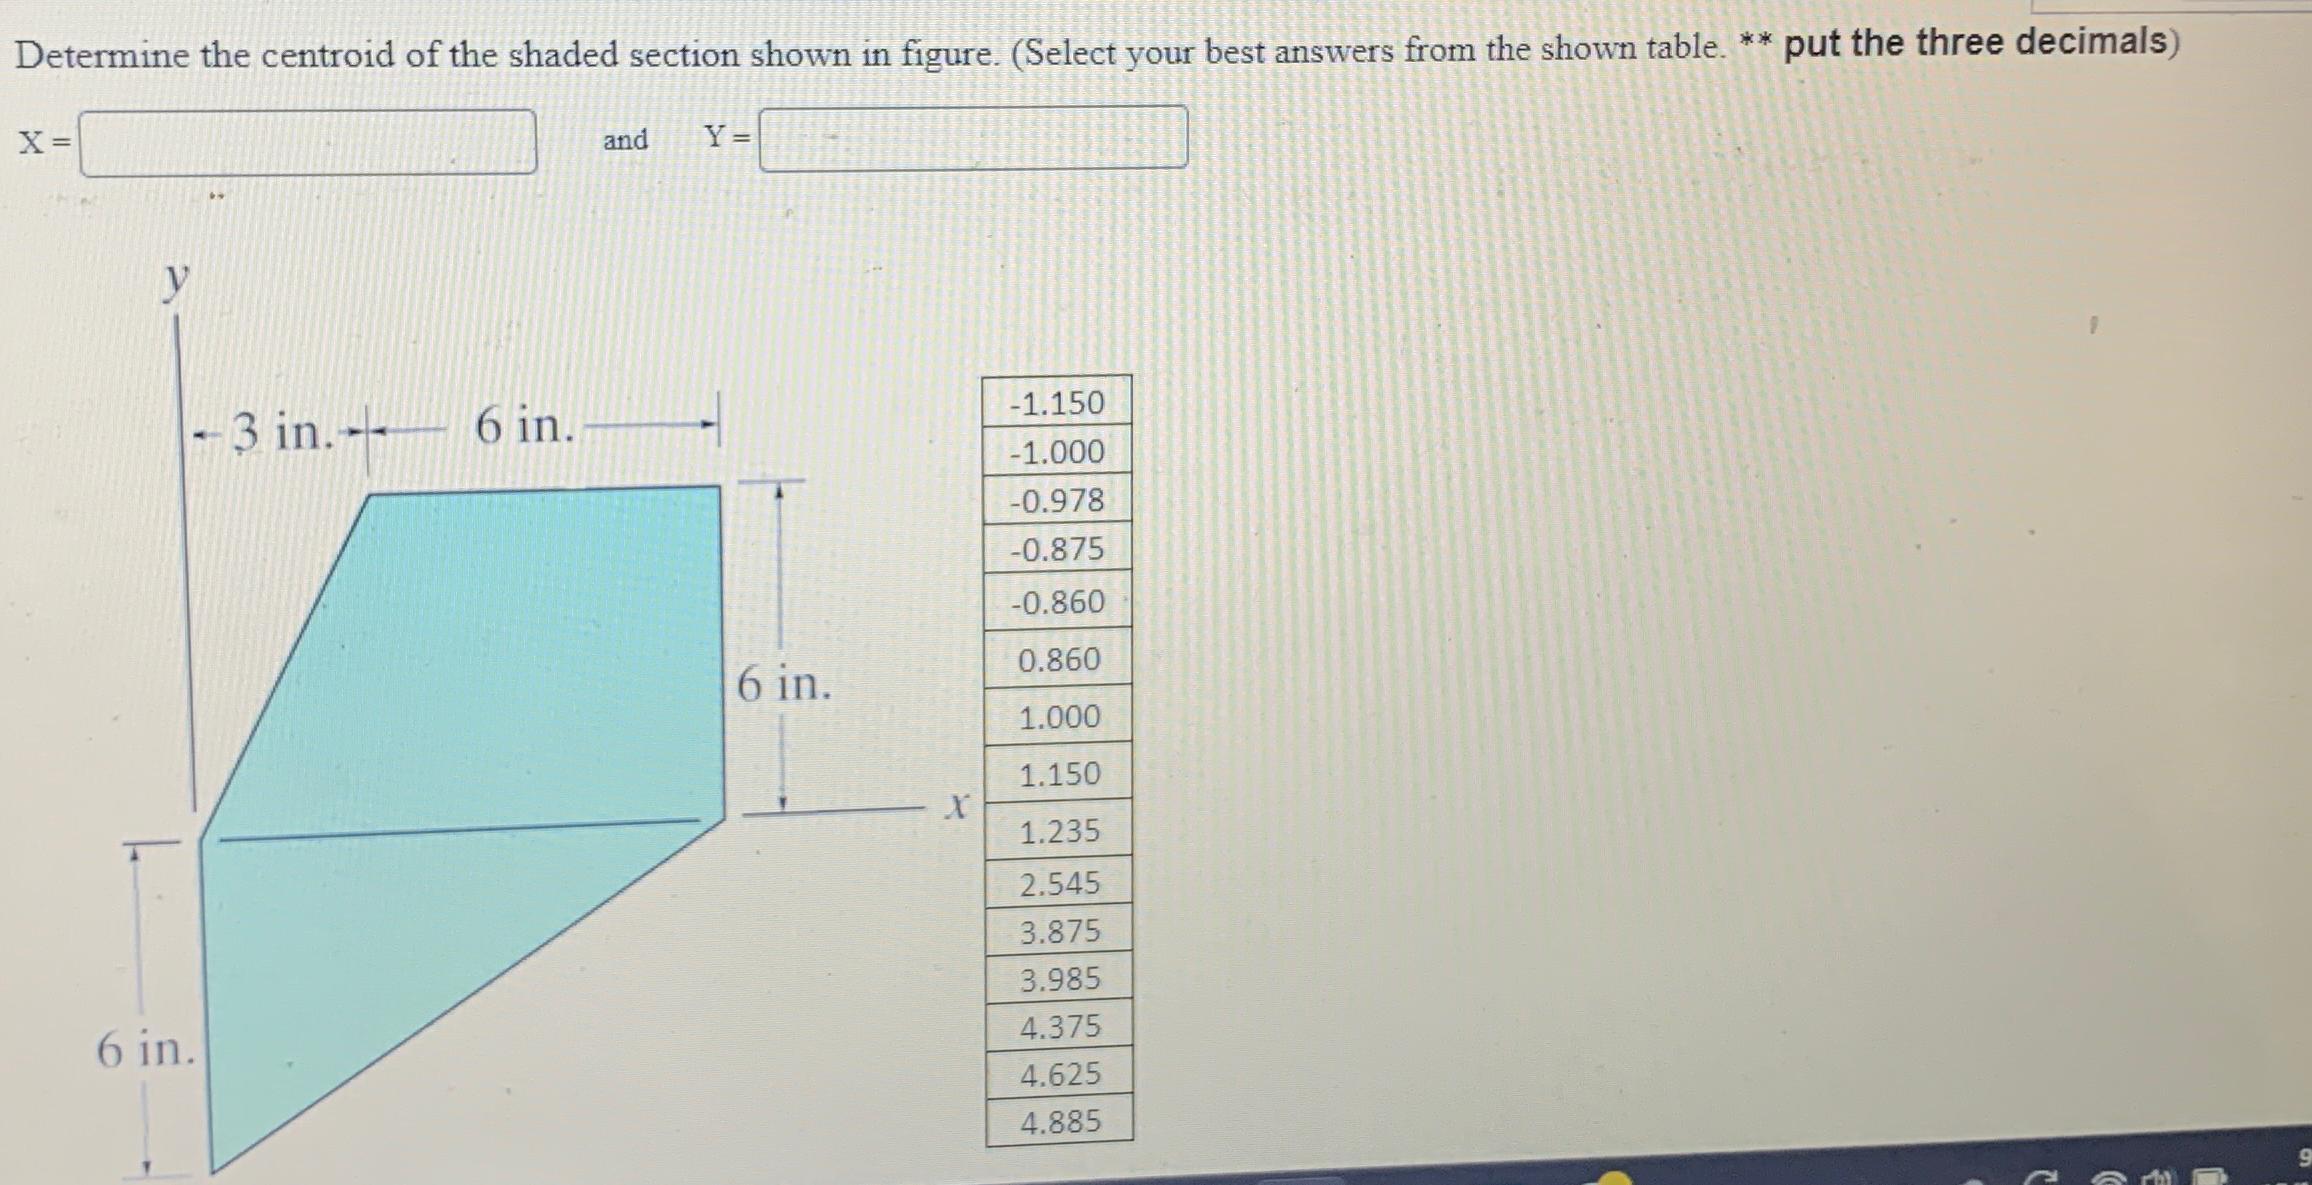 Determine the centroid of the shaded section shown in figure. (Select your best answers from the shown table.